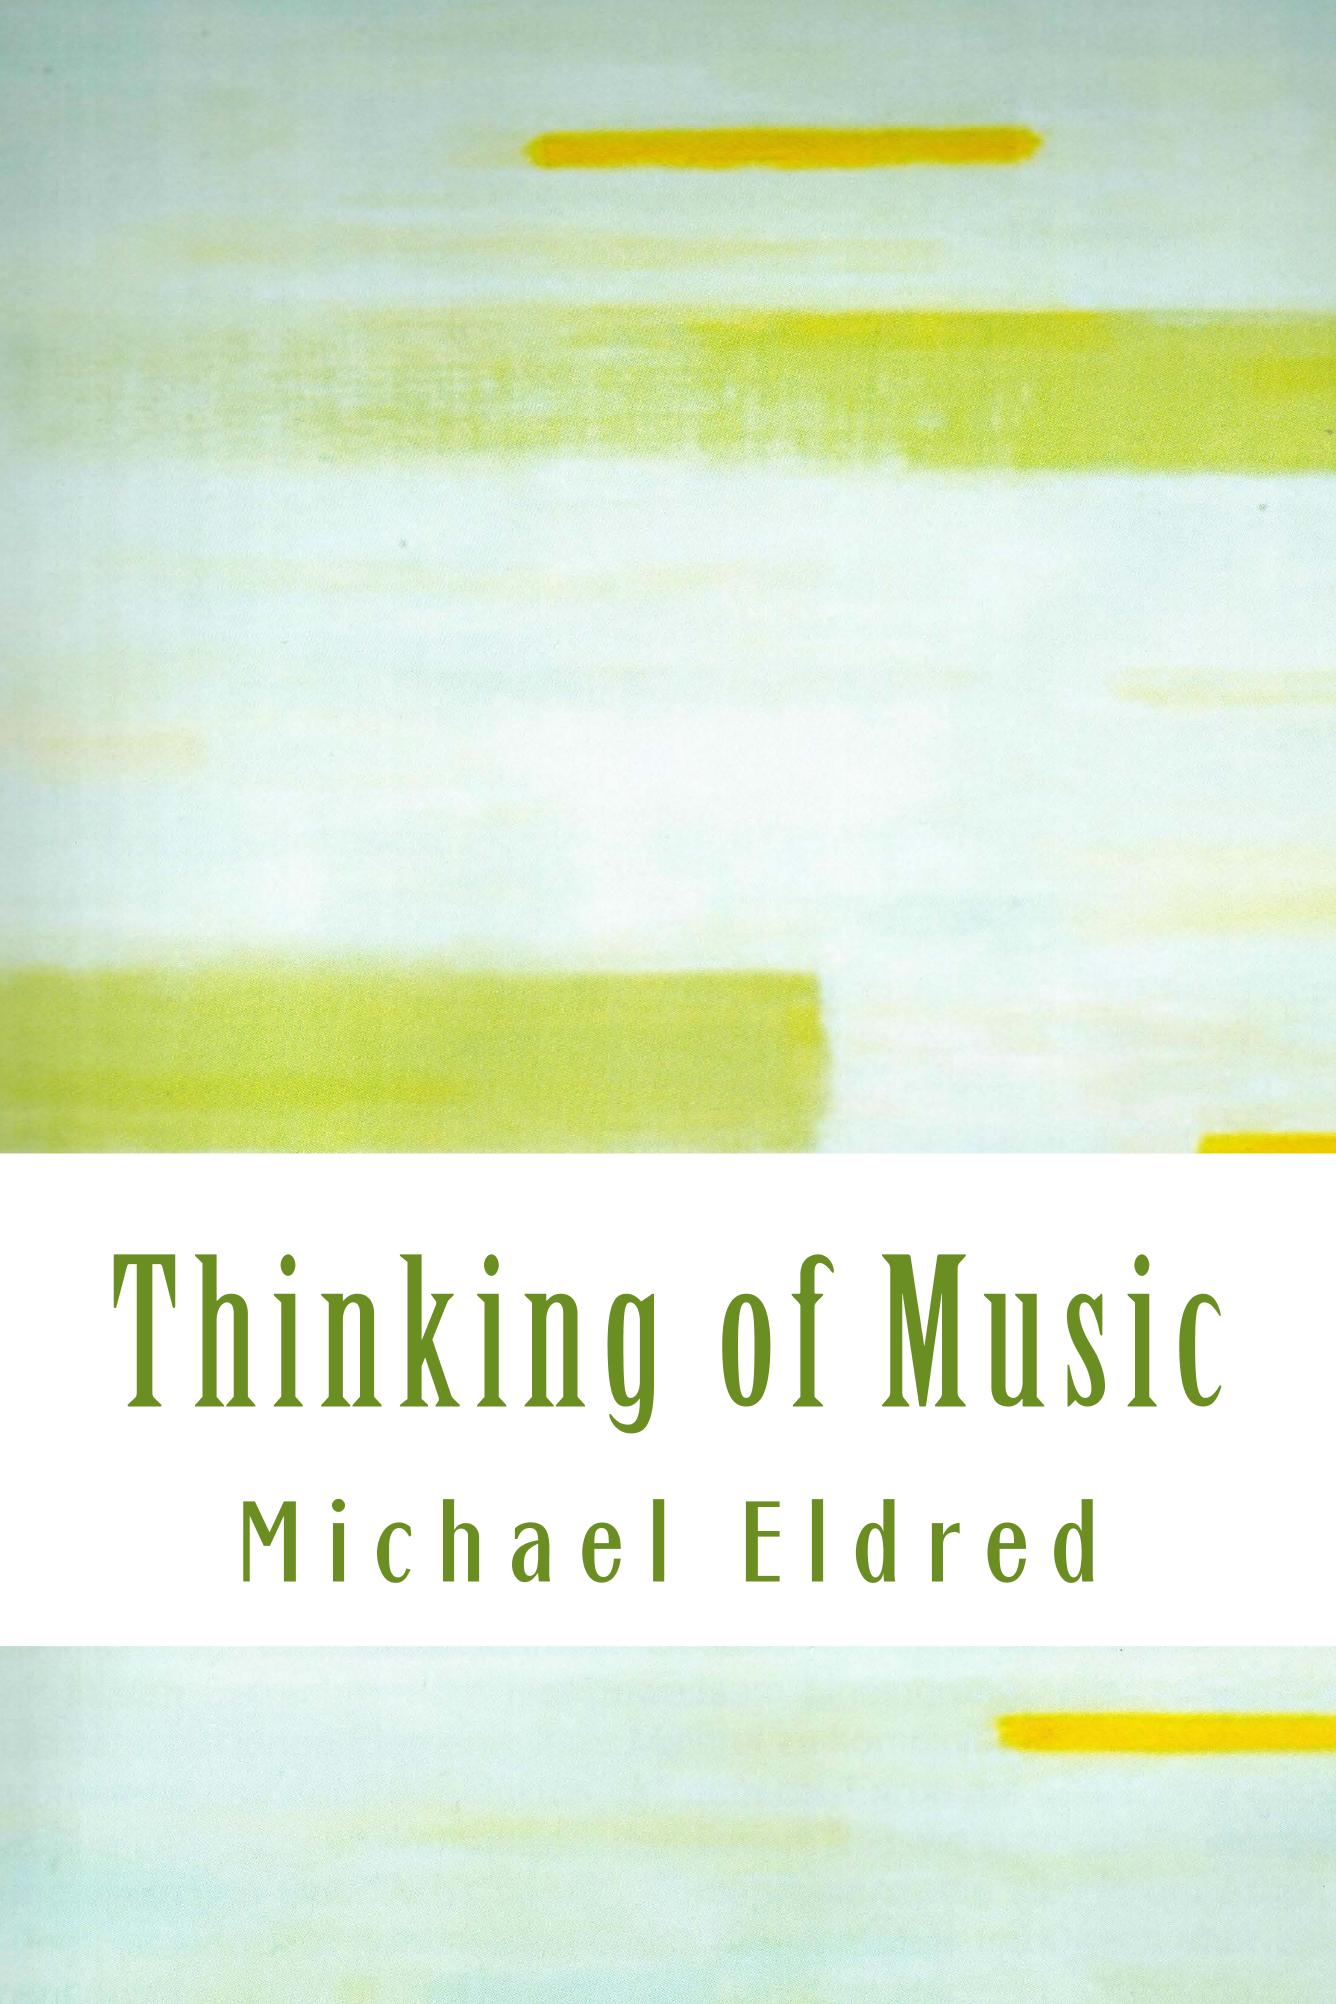 e-book cover: Thinking of Music at Amazon.com